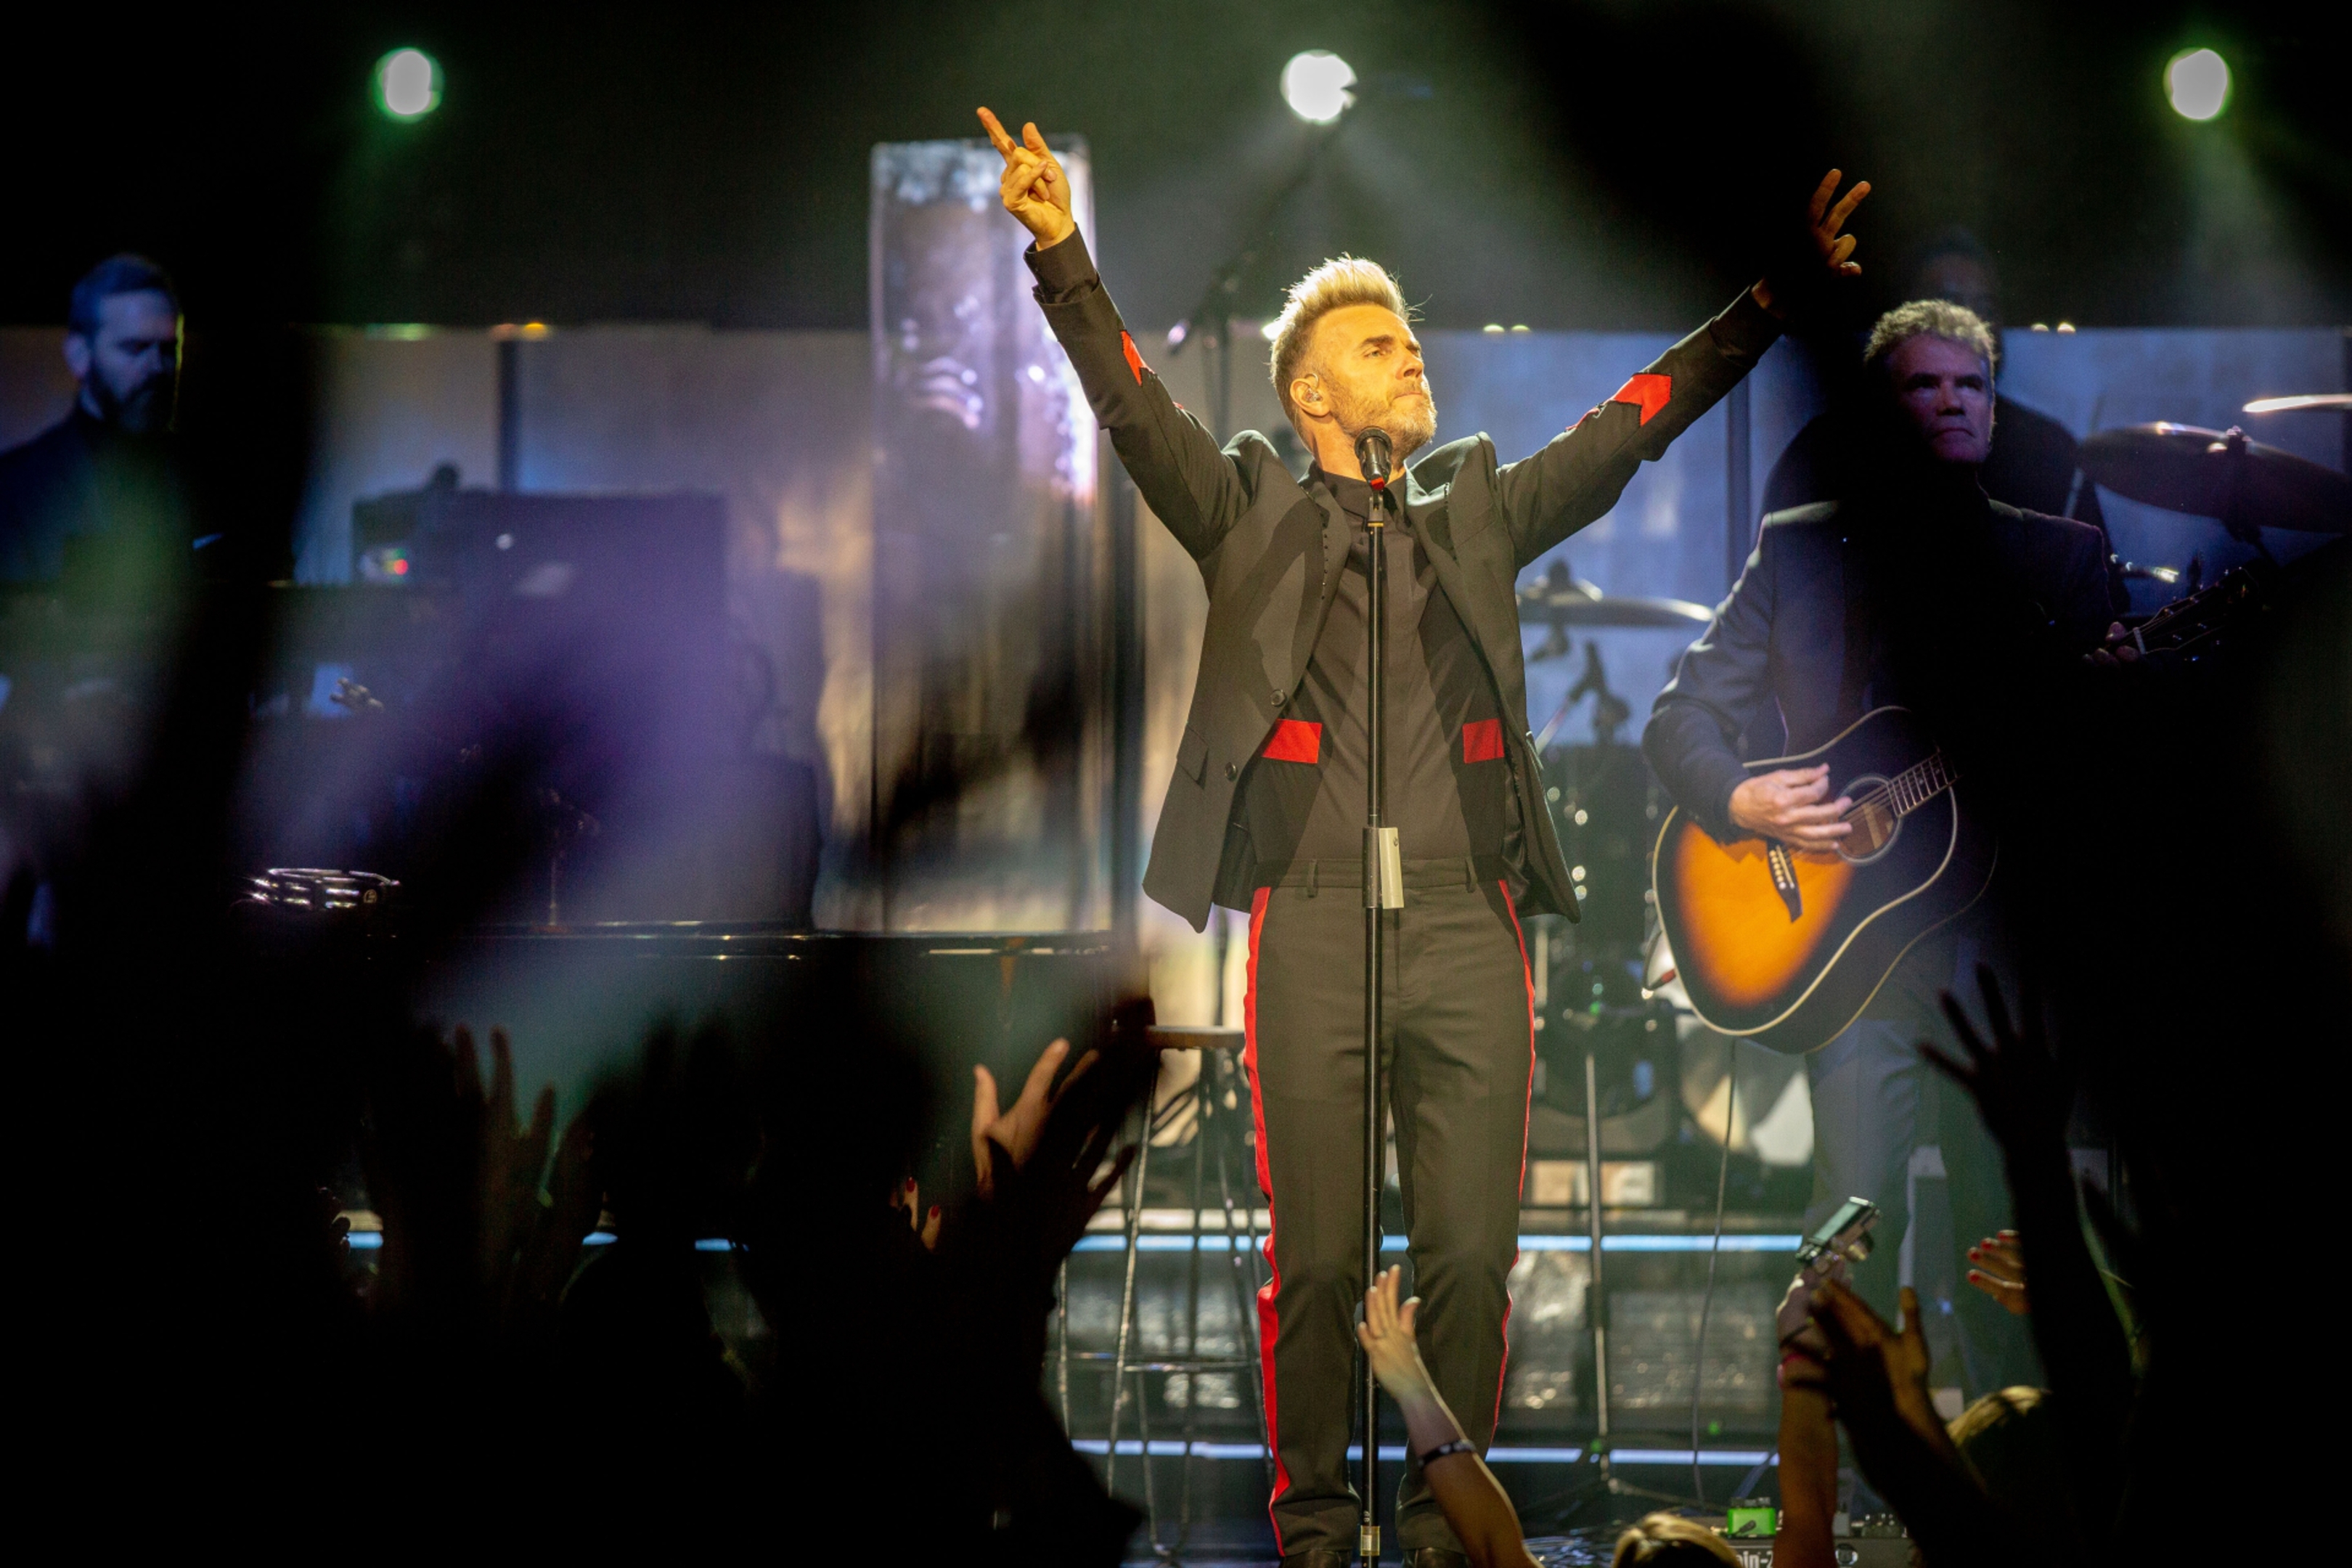 Gary Barlow on stage at the Caird Hall in Dundee.